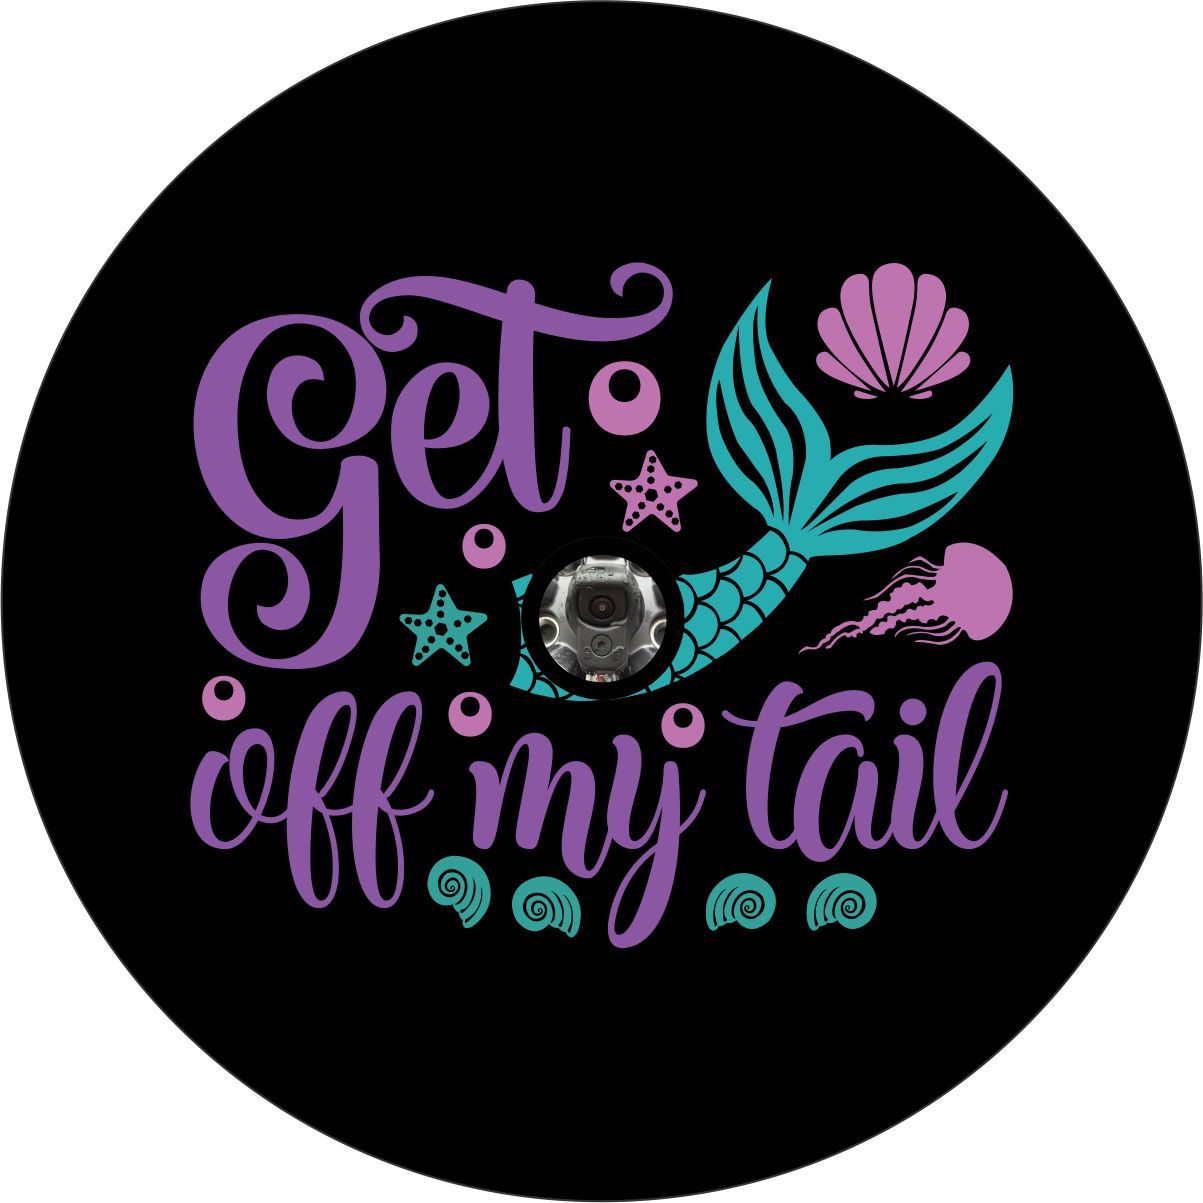 Purple and turquoise spare tire cover design that says 'get off my tail' with a mermaid tail graphic and a hole for a back up camera